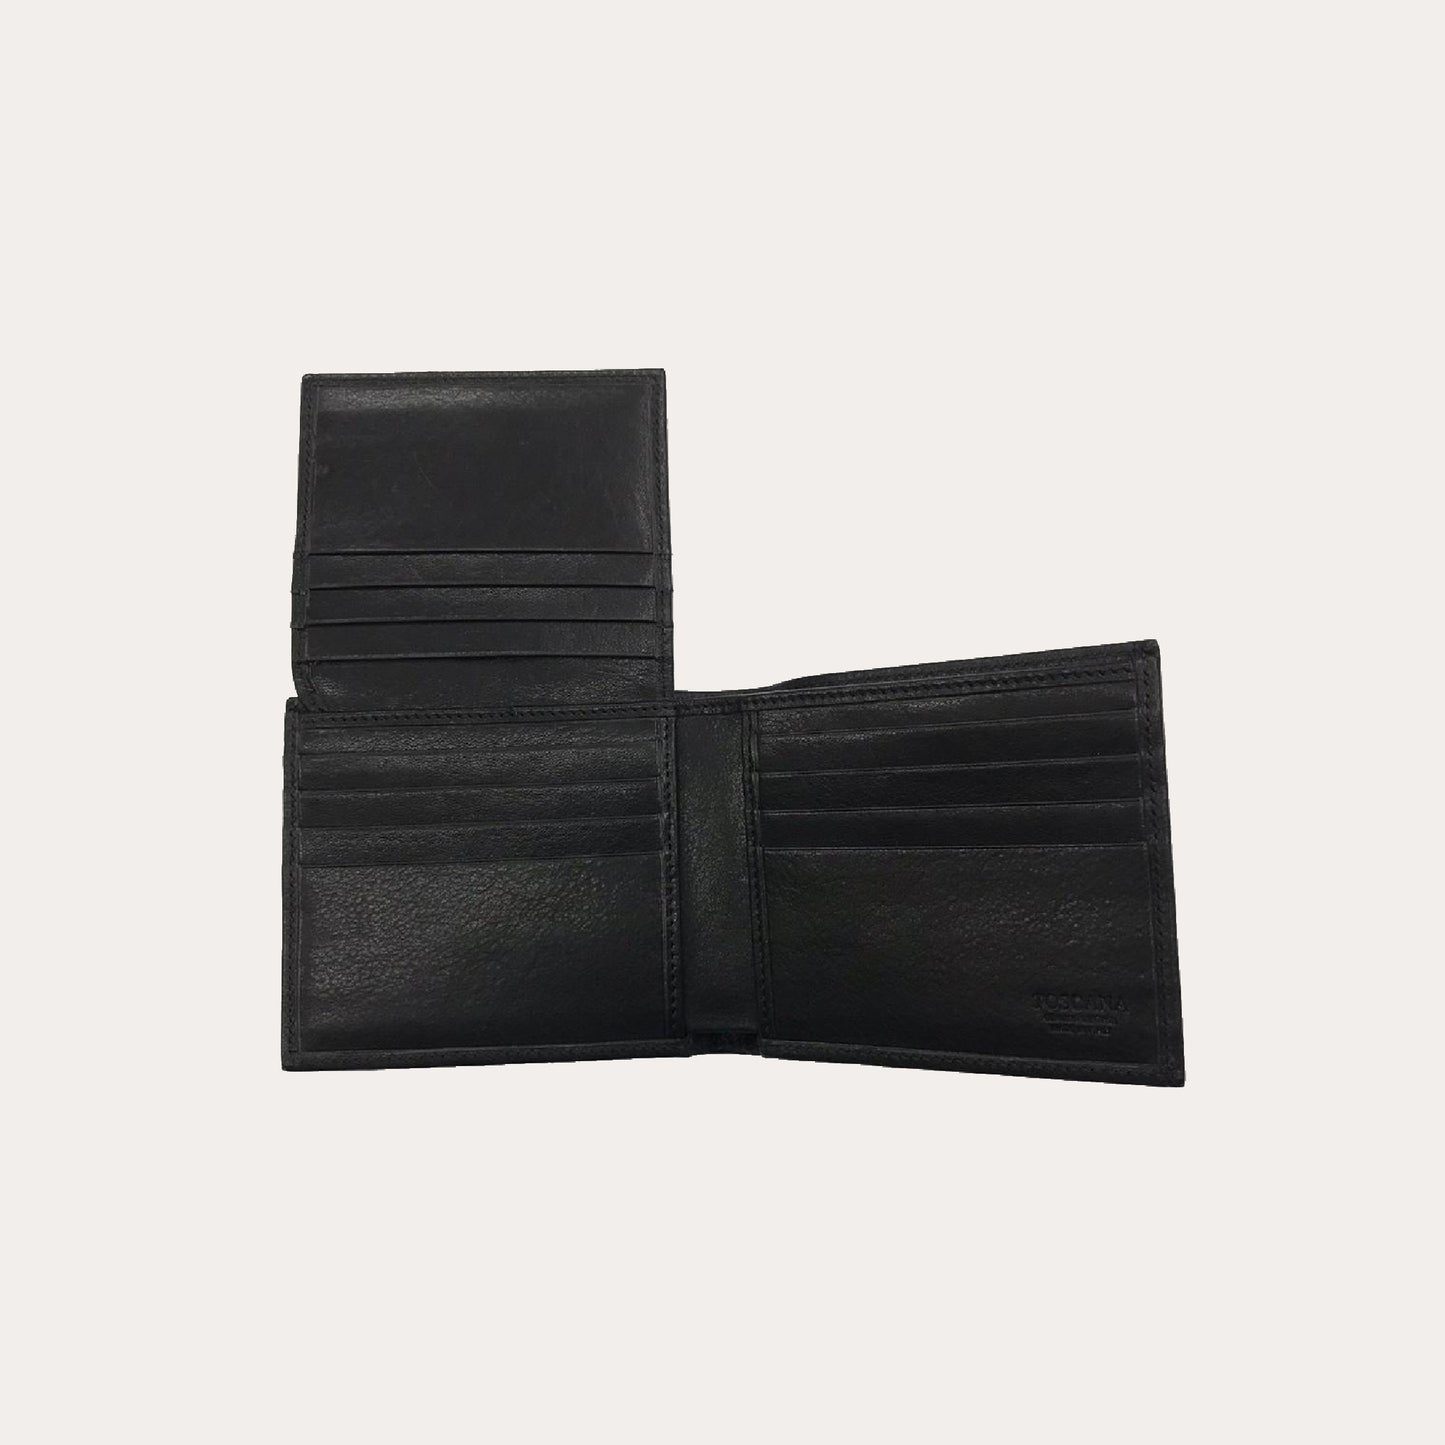 Black Vacchetta Leather Wallet-15 Credit Card Sections